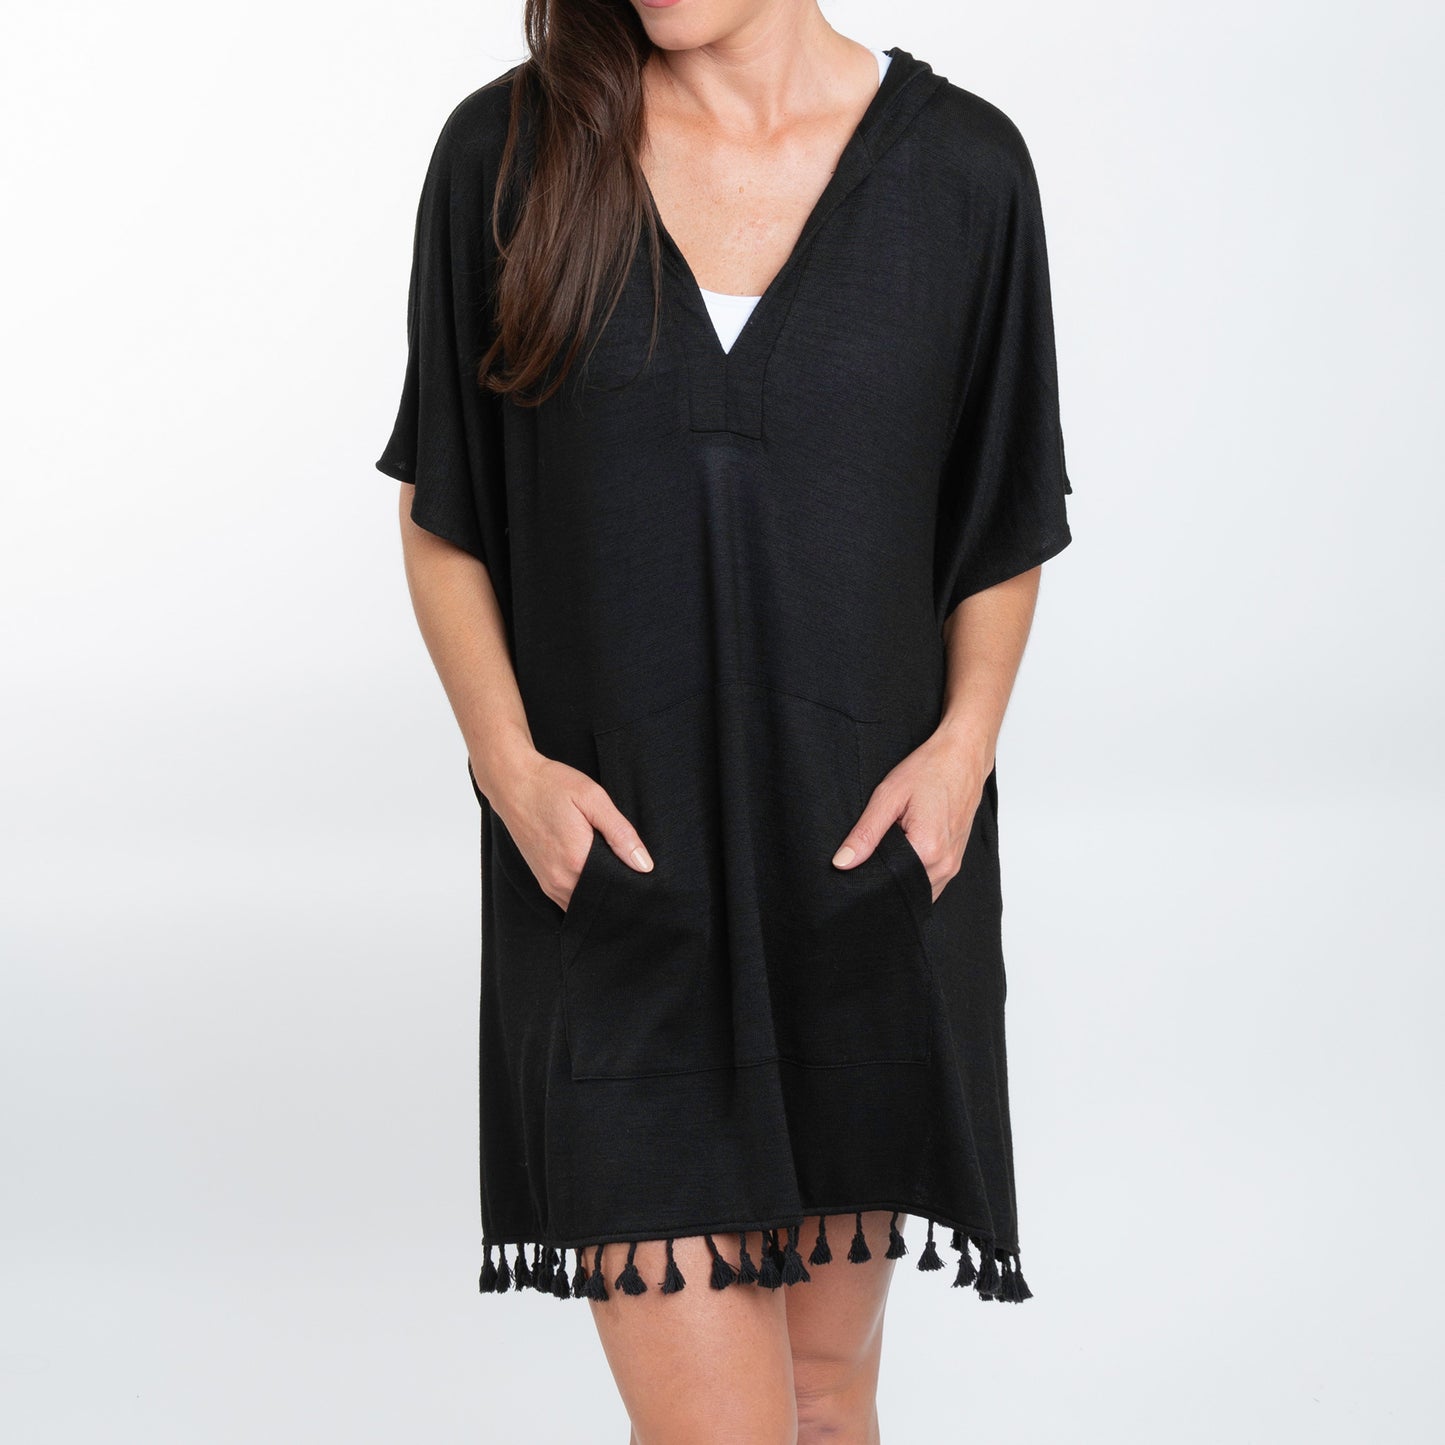 Naomi One Size Hooded Poncho Swimsuit Cover Up